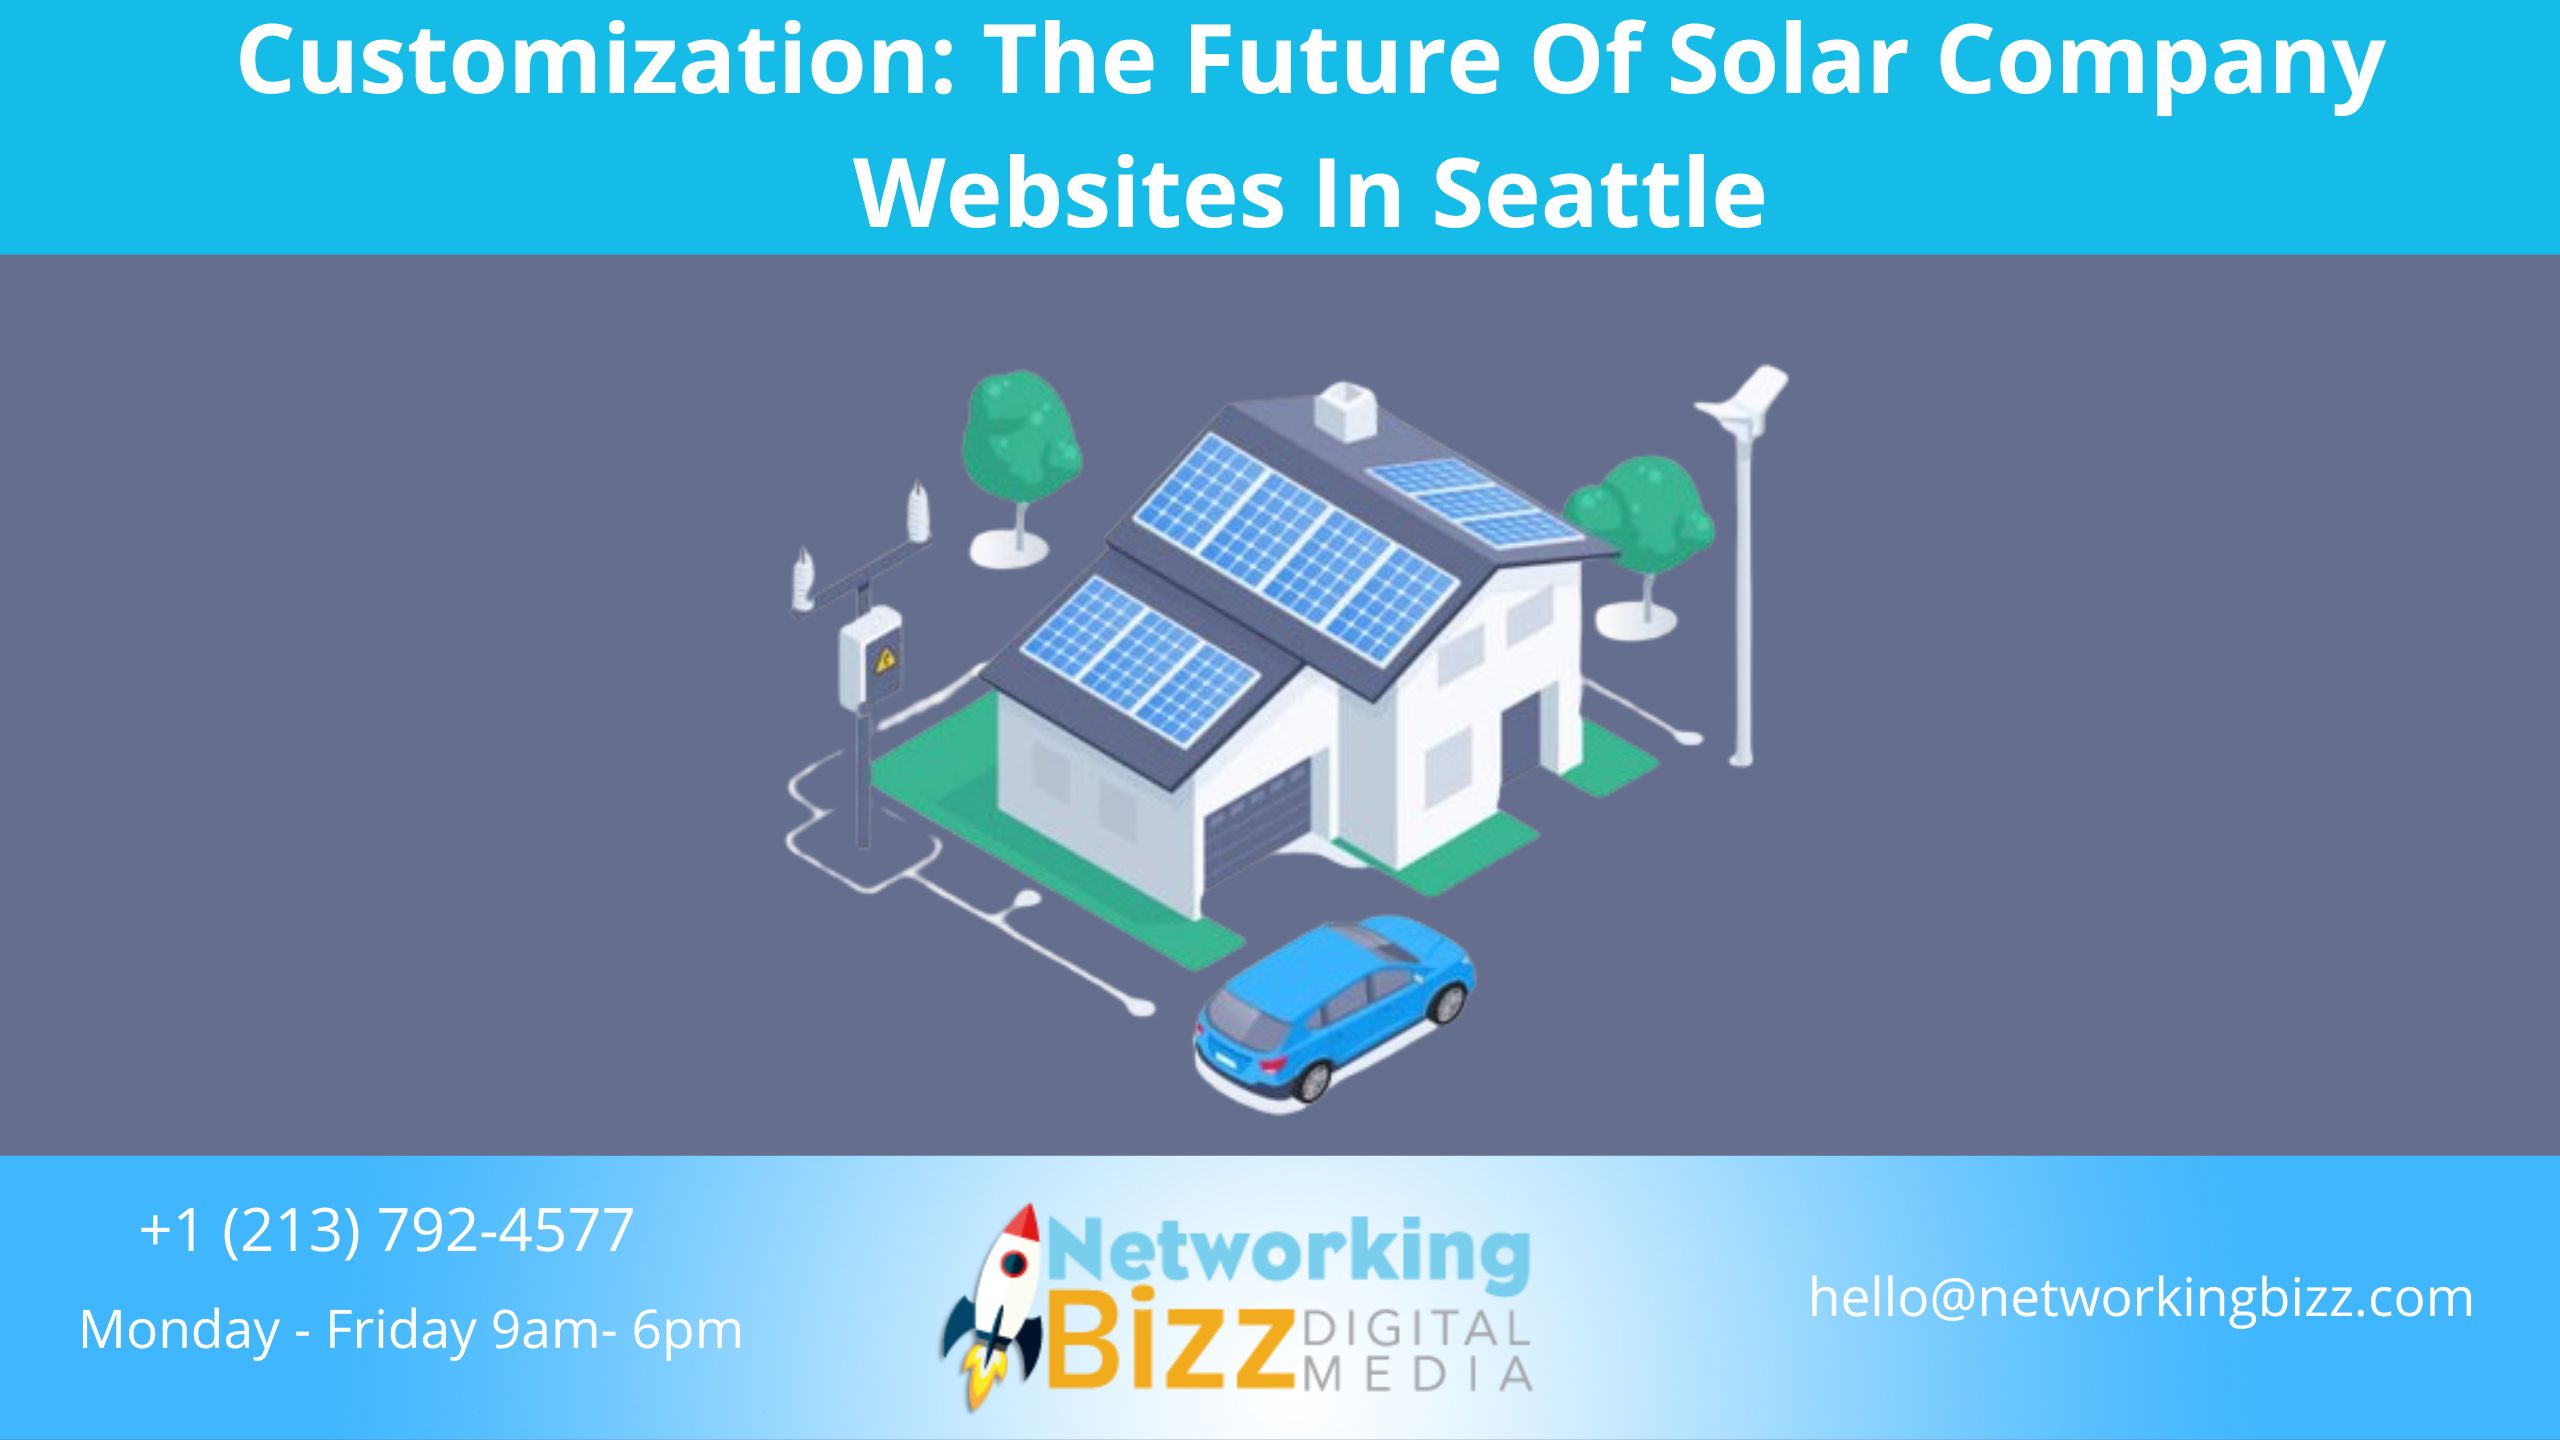 Customization: The Future Of Solar Company Websites In Seattle